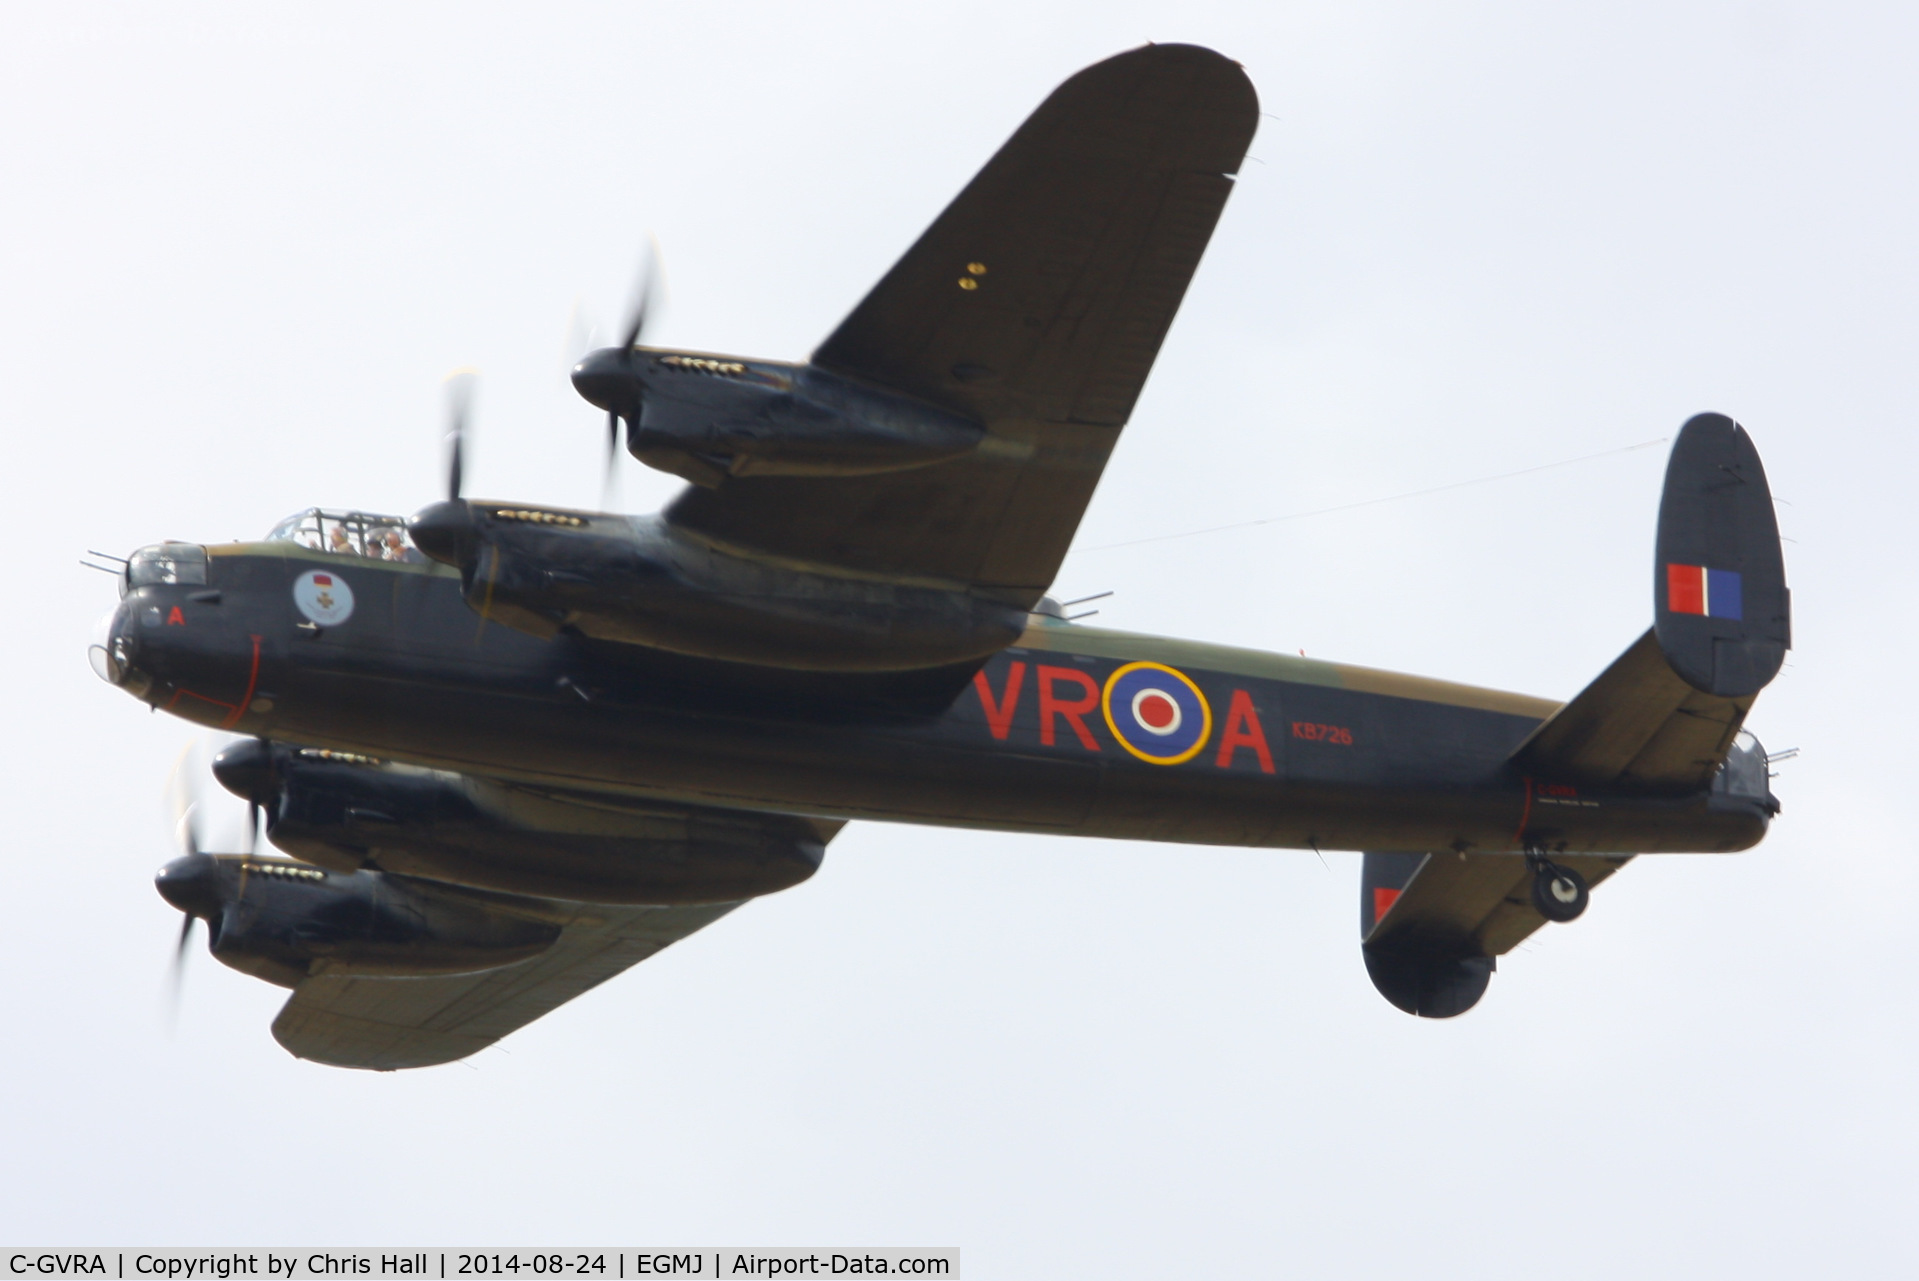 C-GVRA, 1945 Victory Aircraft Avro 683 Lancaster BX C/N FM 213 (3414), at the Little Gransden Airshow 2014